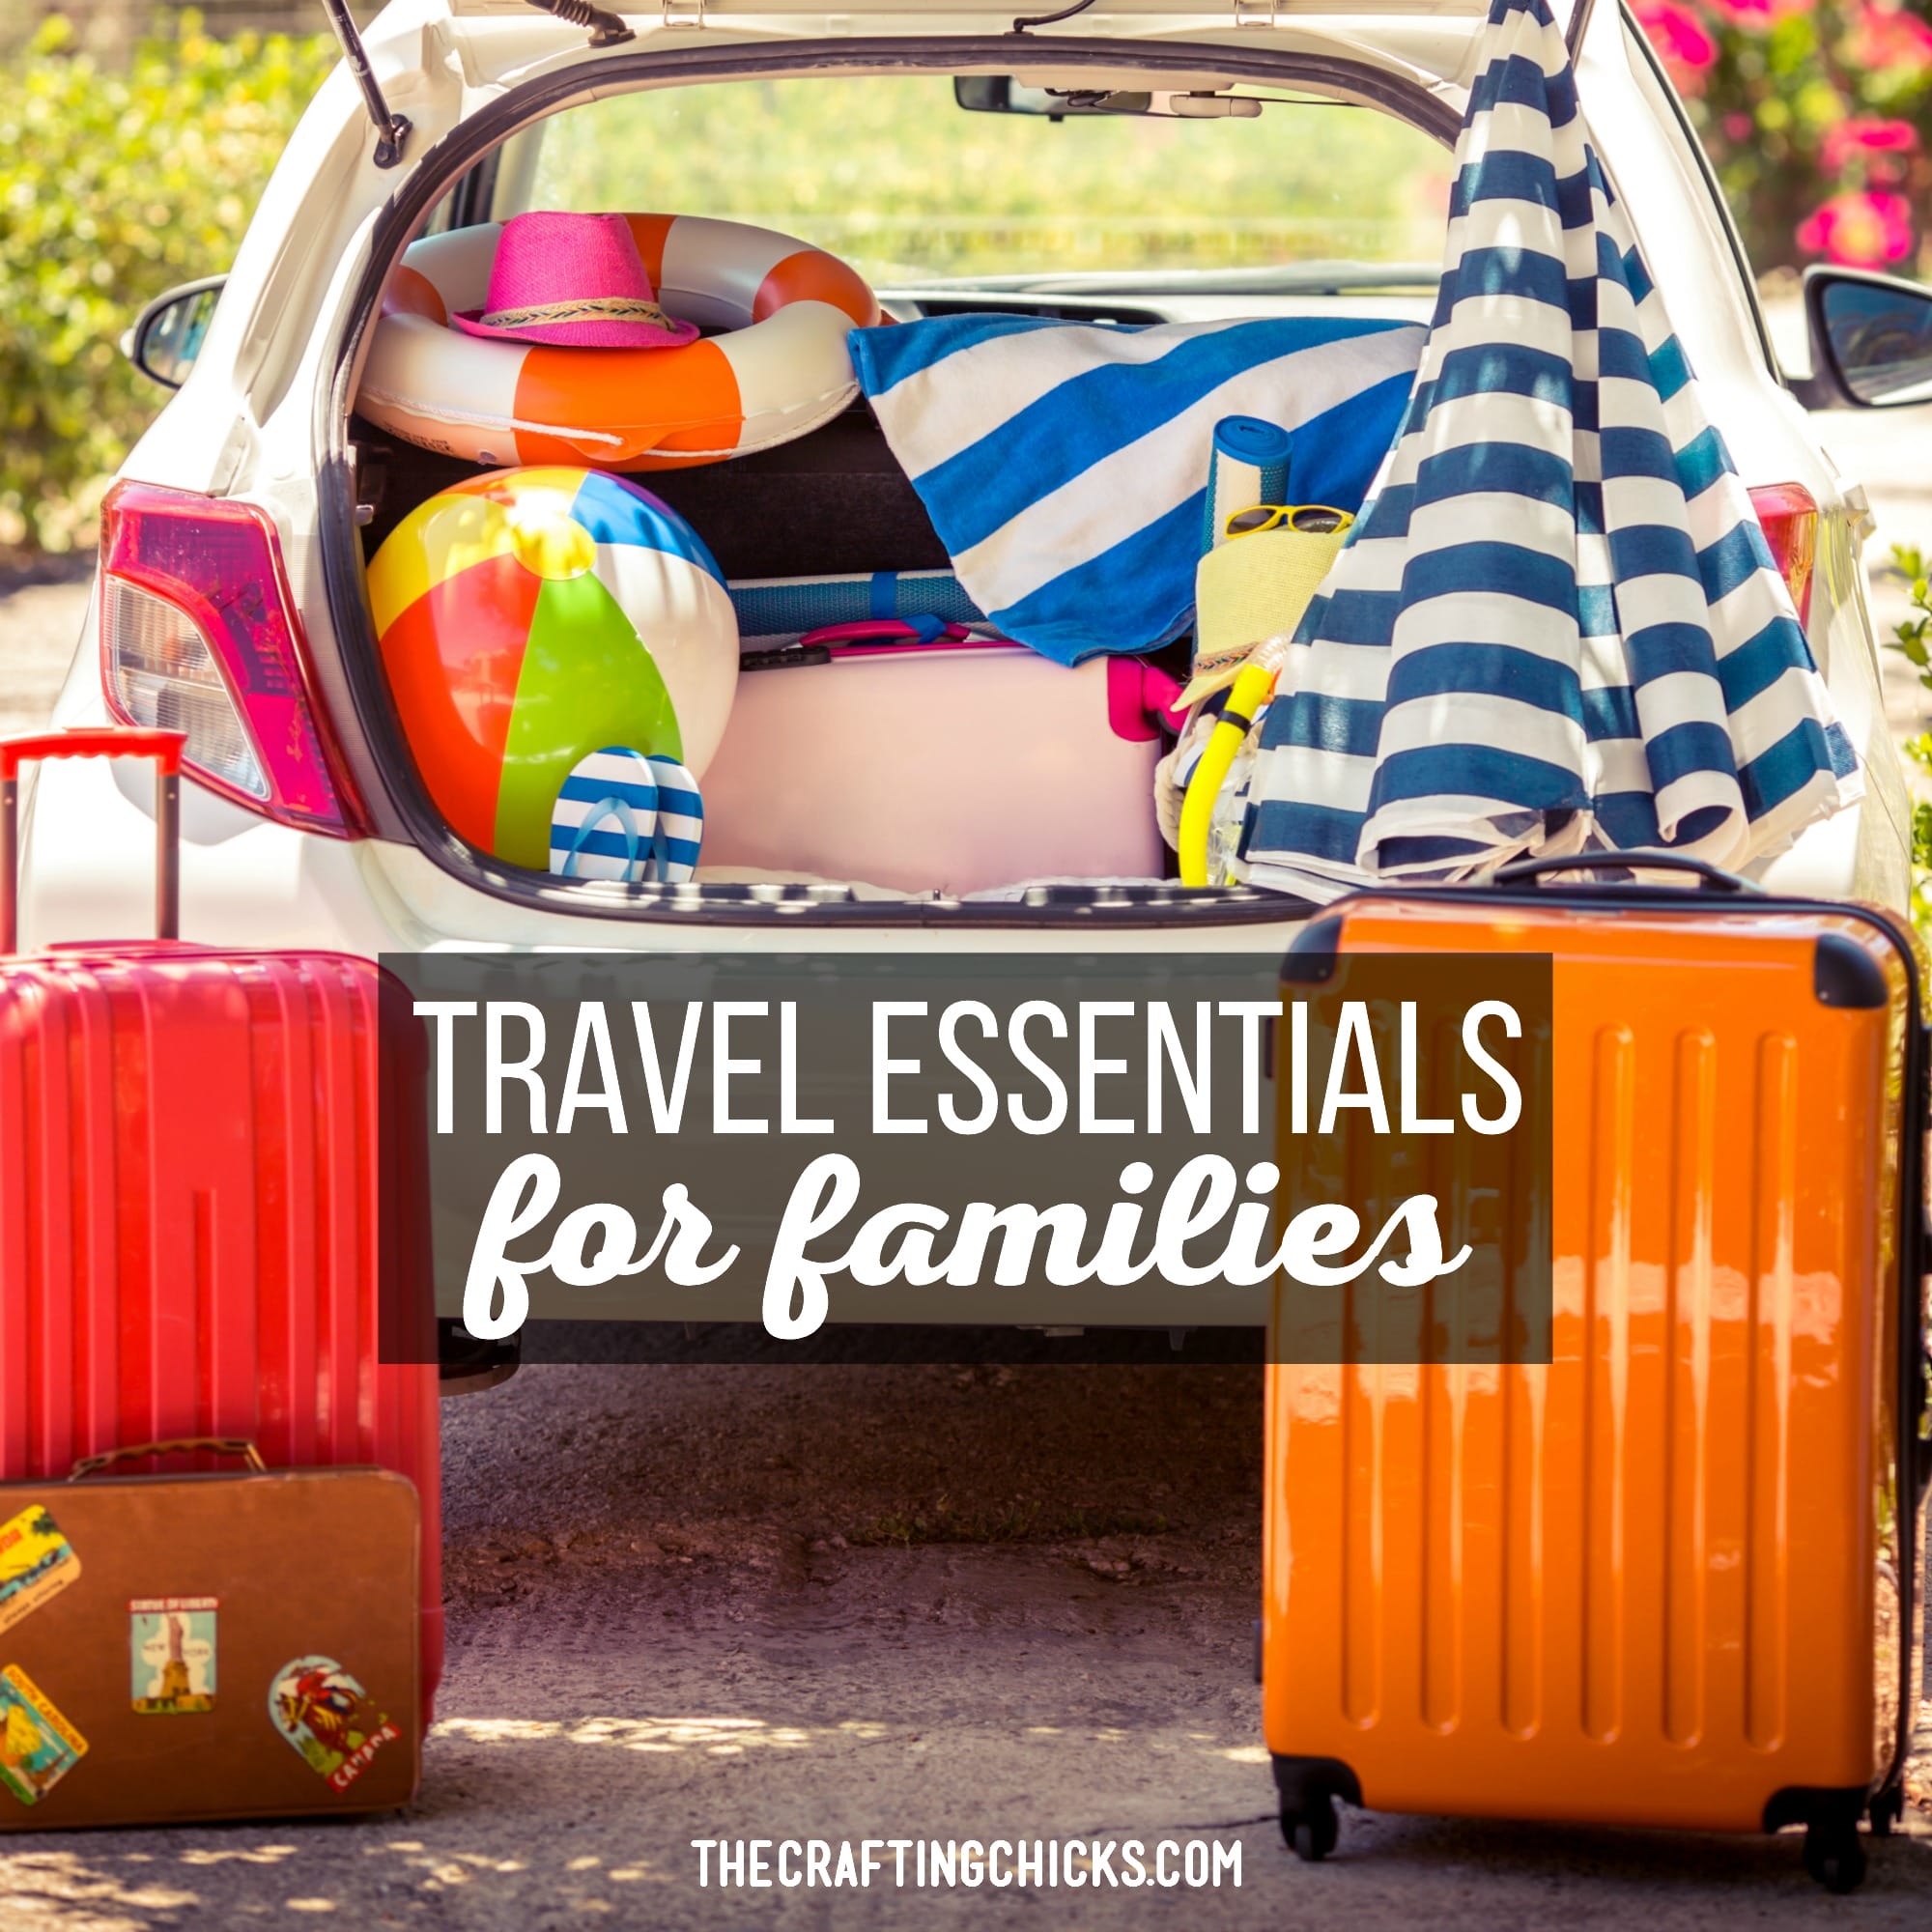 Traveling with family can be an adventure! Let's make it a great one with these travel essentials for families. Everything to make your trip easier.